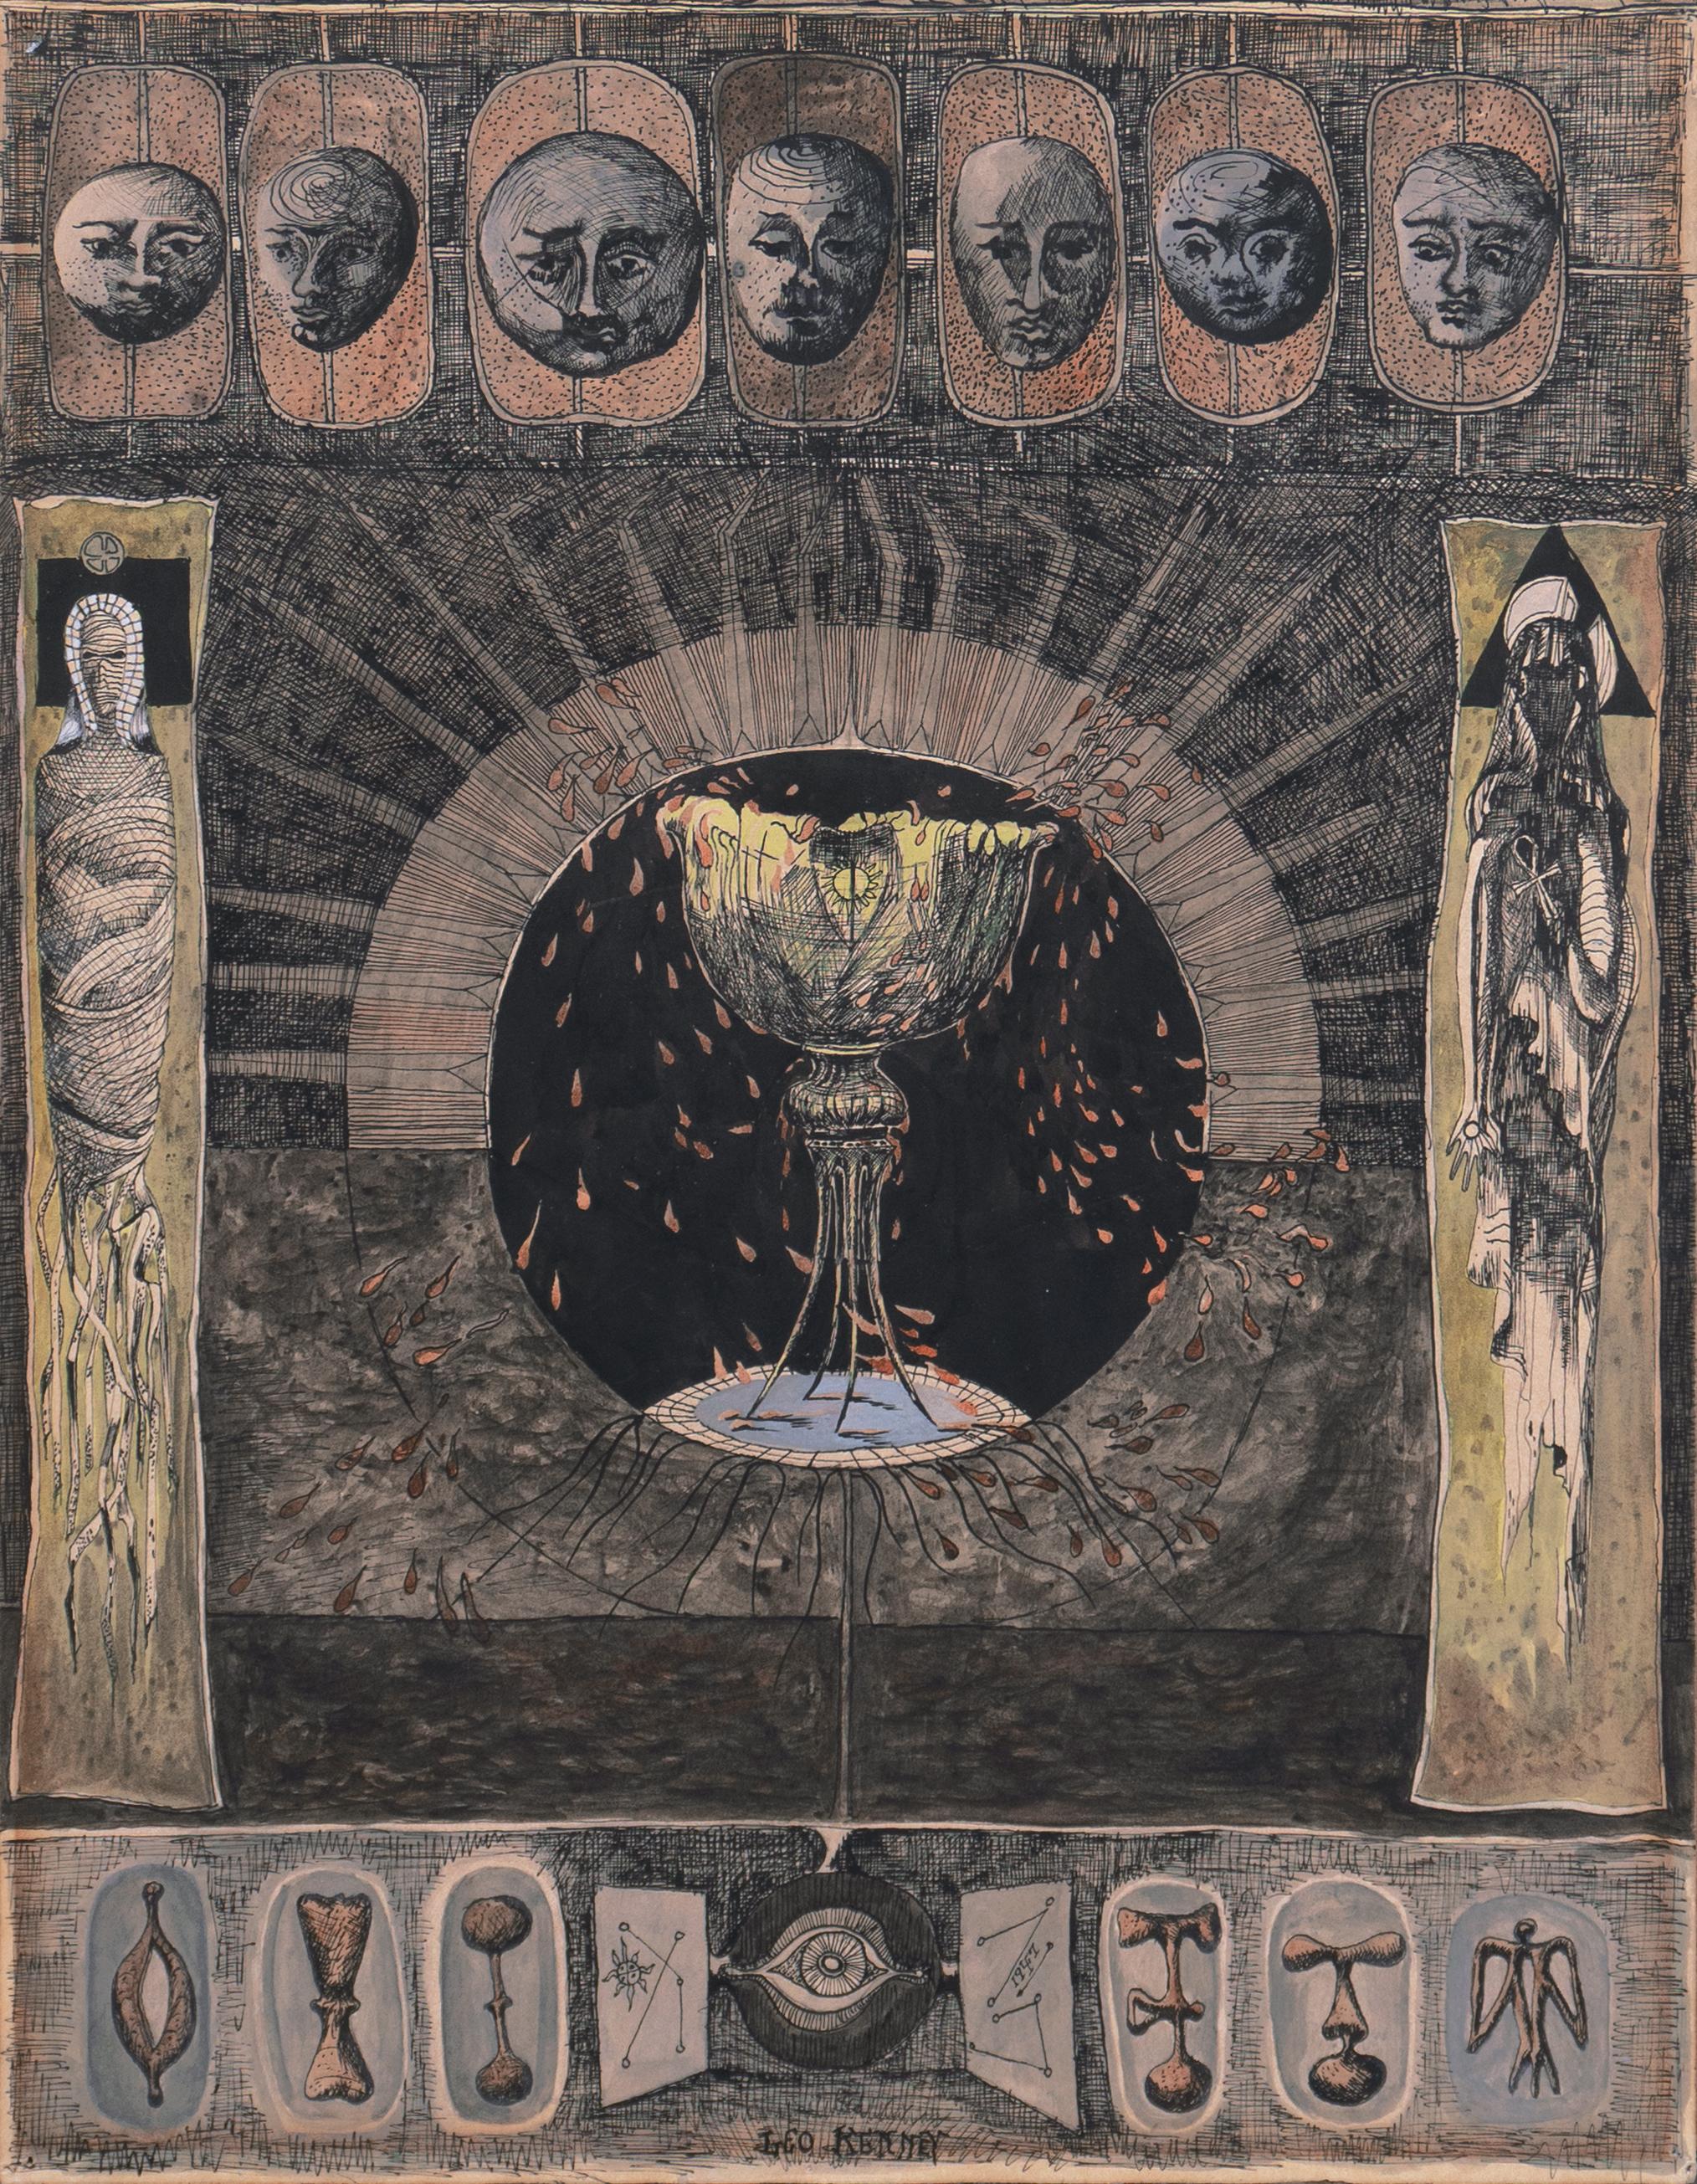 Leo Kenney Abstract Drawing - 'The Holy Grail', Last Supper, Egyptian Iconography, Seattle Art Museum, Surreal